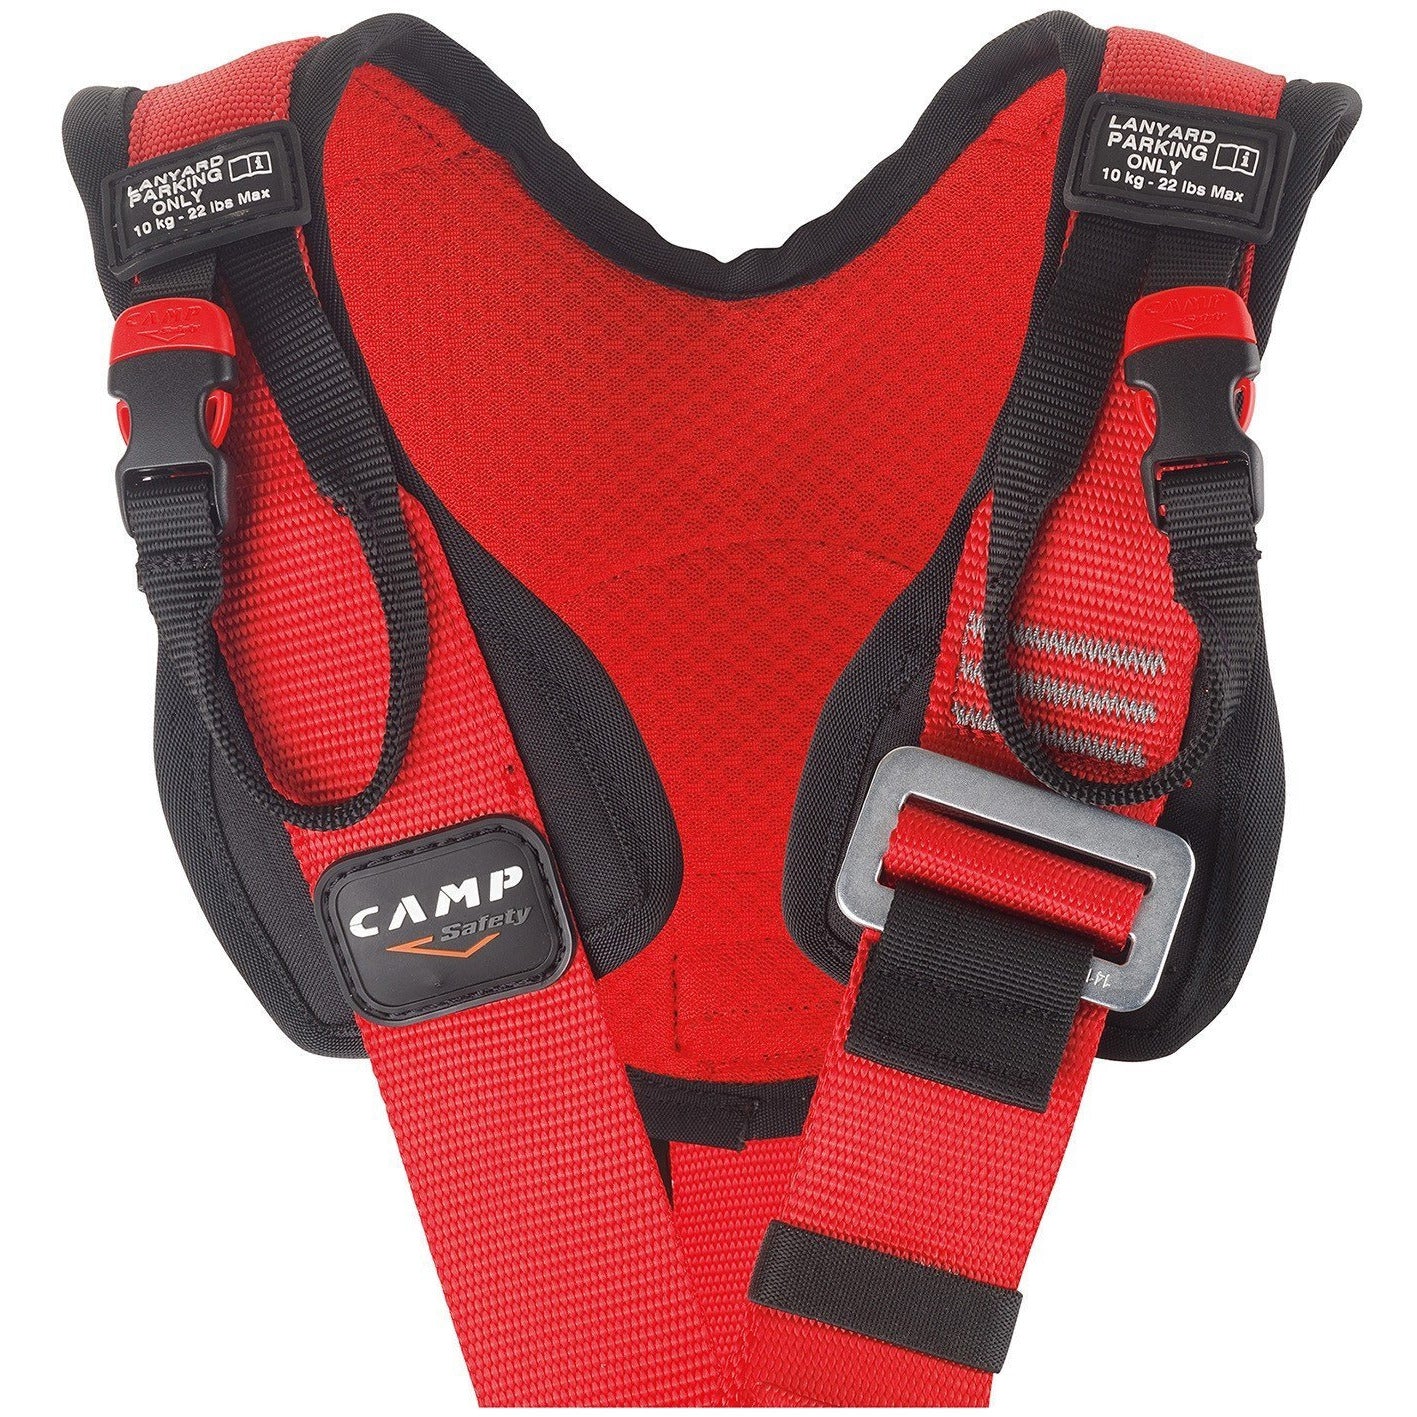 CAMP GT ANSI Full Body Harness - Aerial Adventure Tech